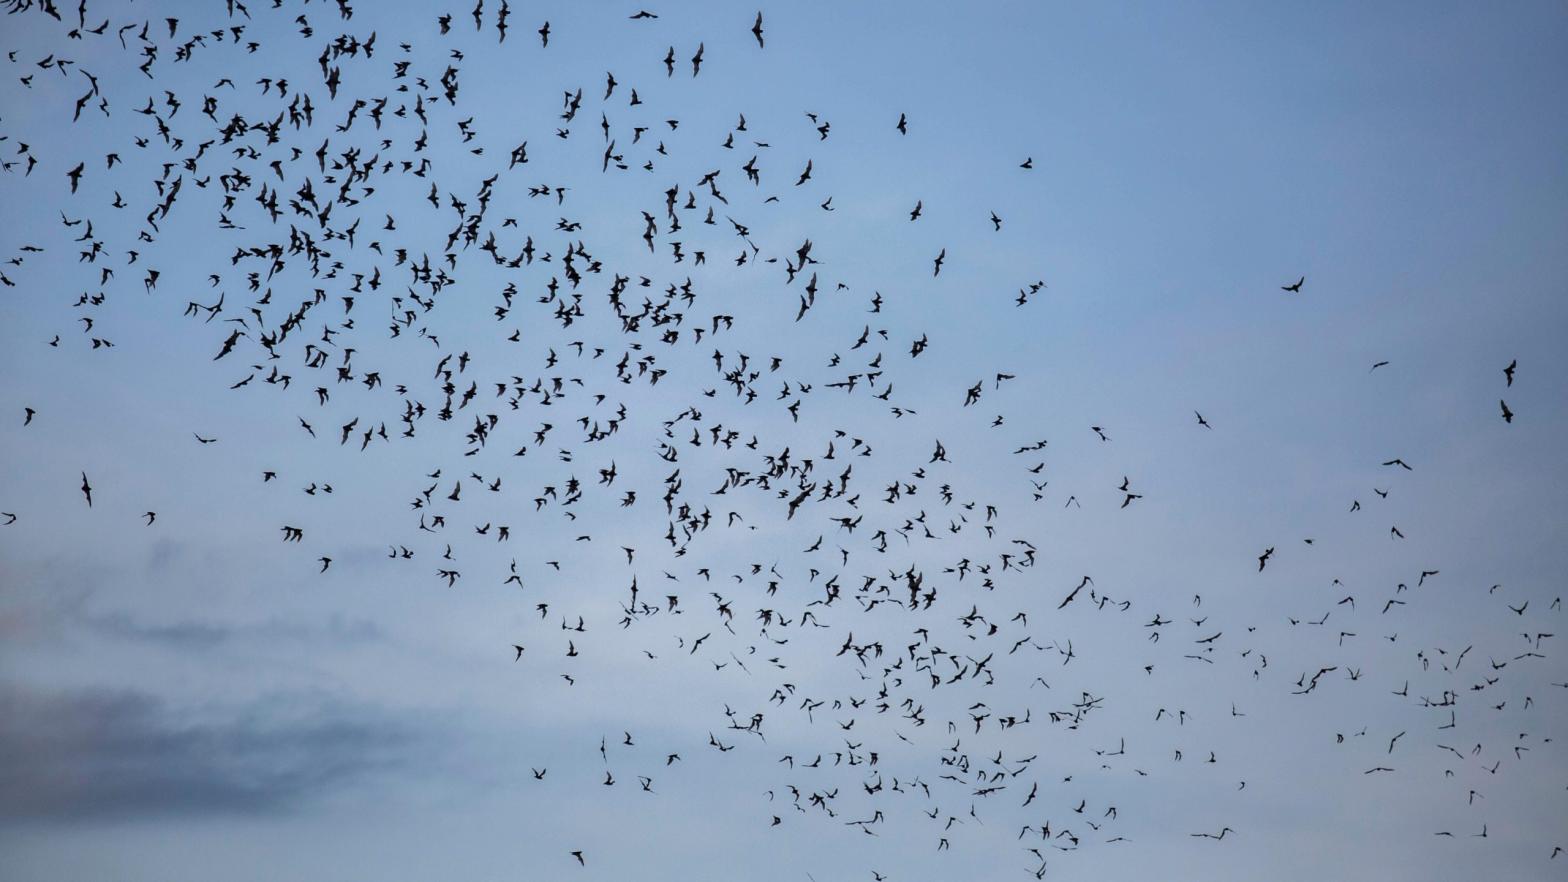 Millions of bats fly out of the Khao Chong Pran Cave at sunset for feeding on September 12, 2020 in Ratchaburi, Thailand. (Photo: Lauren DeCicca, Getty Images)